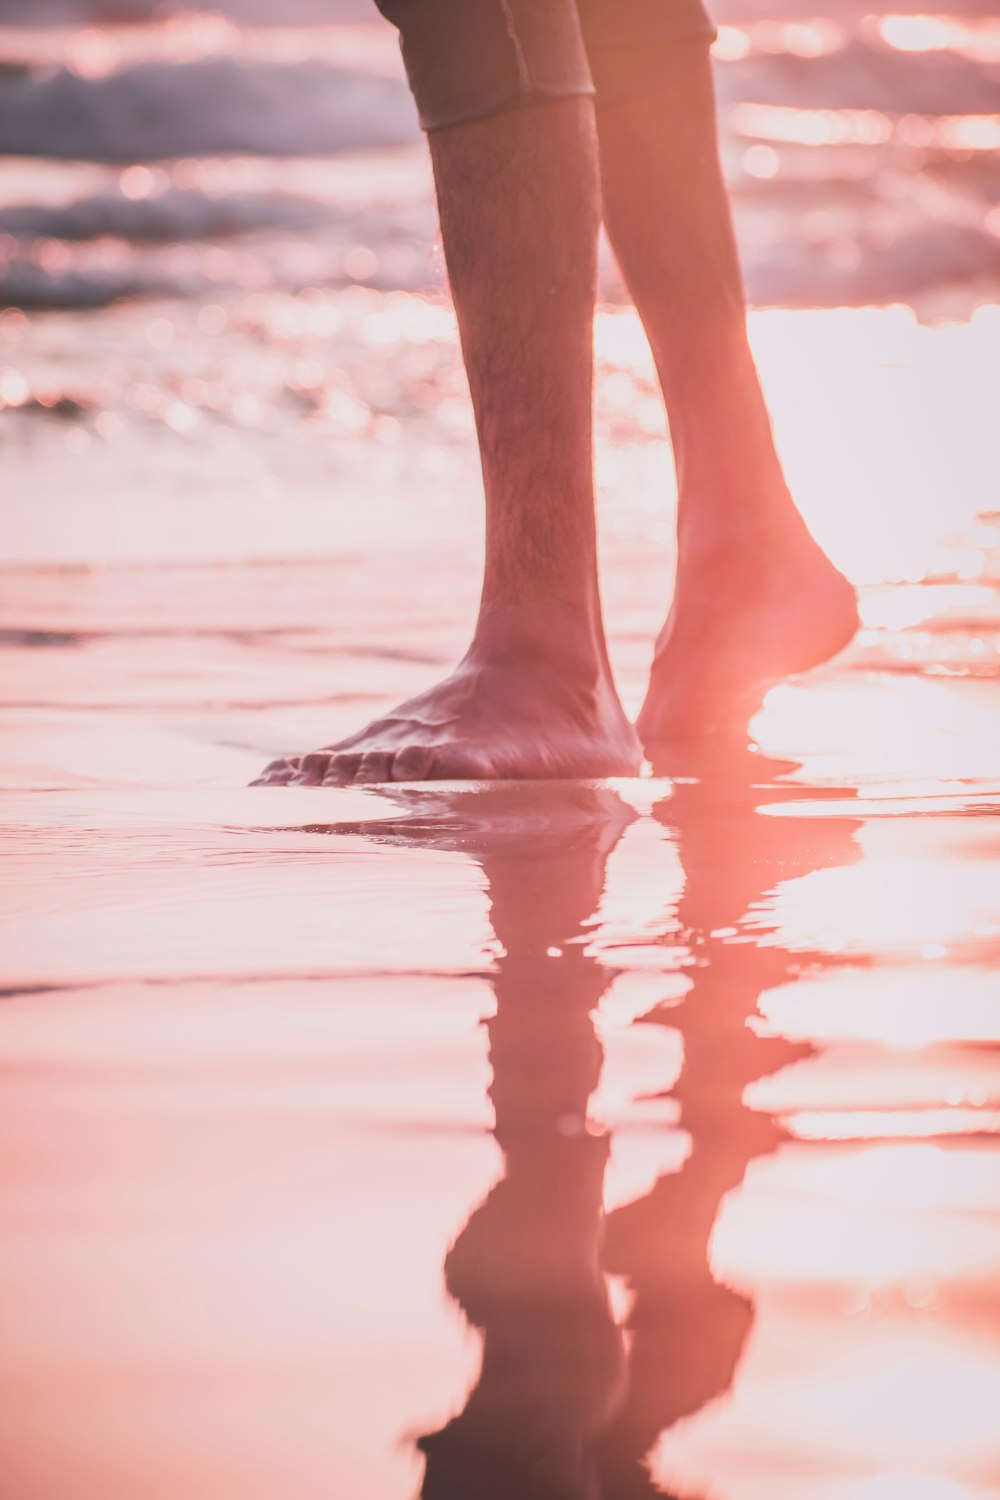 shallow focus photo of person's feet